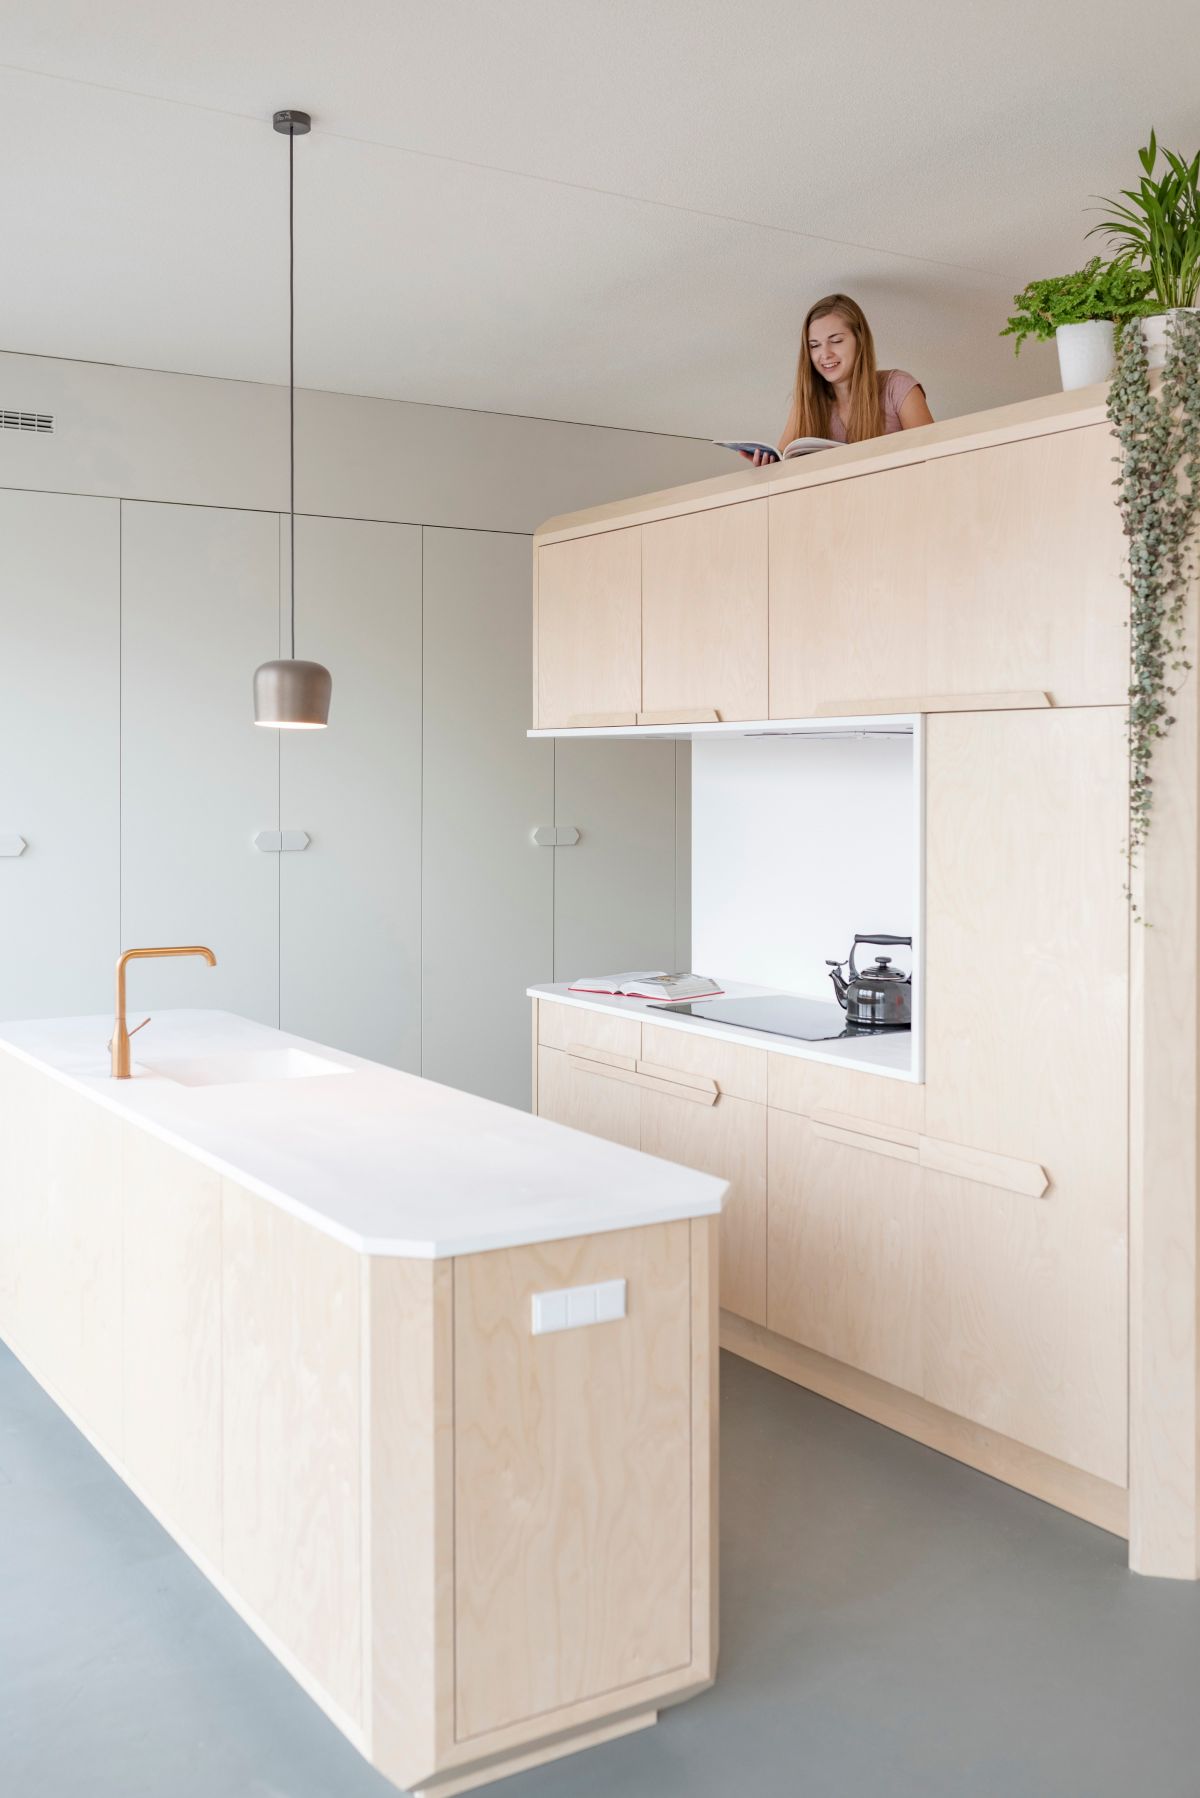 The combination of birch wood and white Corian gives the apartment a modern and clean aesthetic